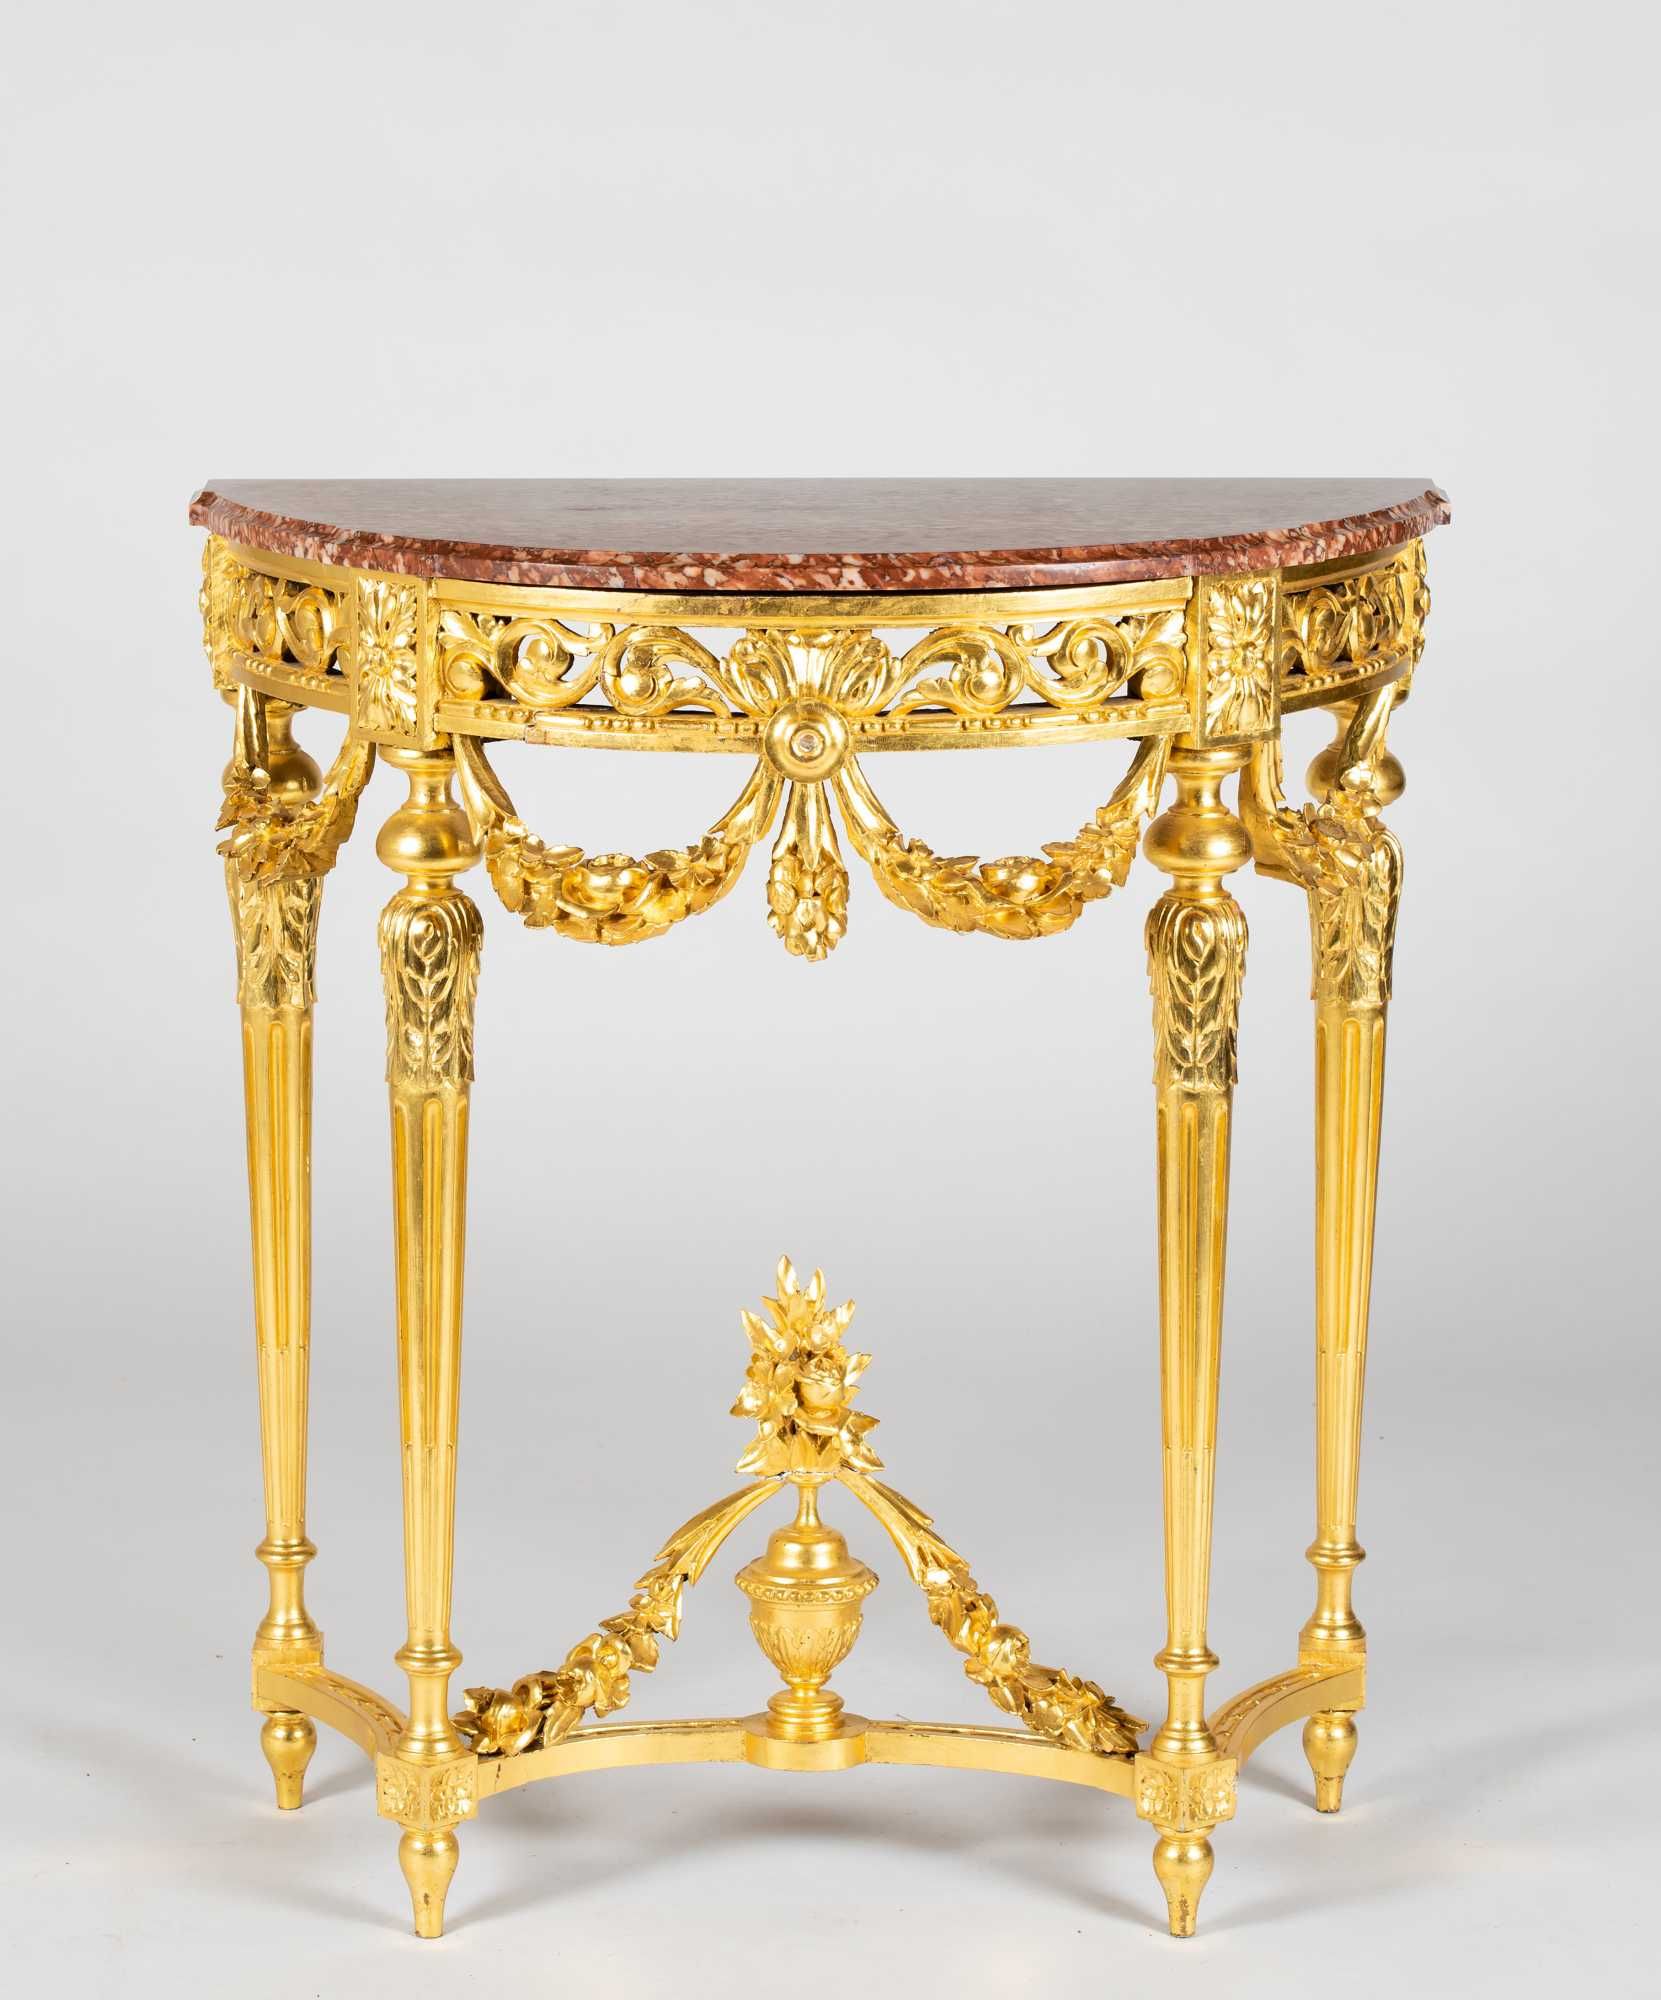 Small French Marble Top Gilded And Carved Console Table Regarding Marble Top Console Tables (View 8 of 20)